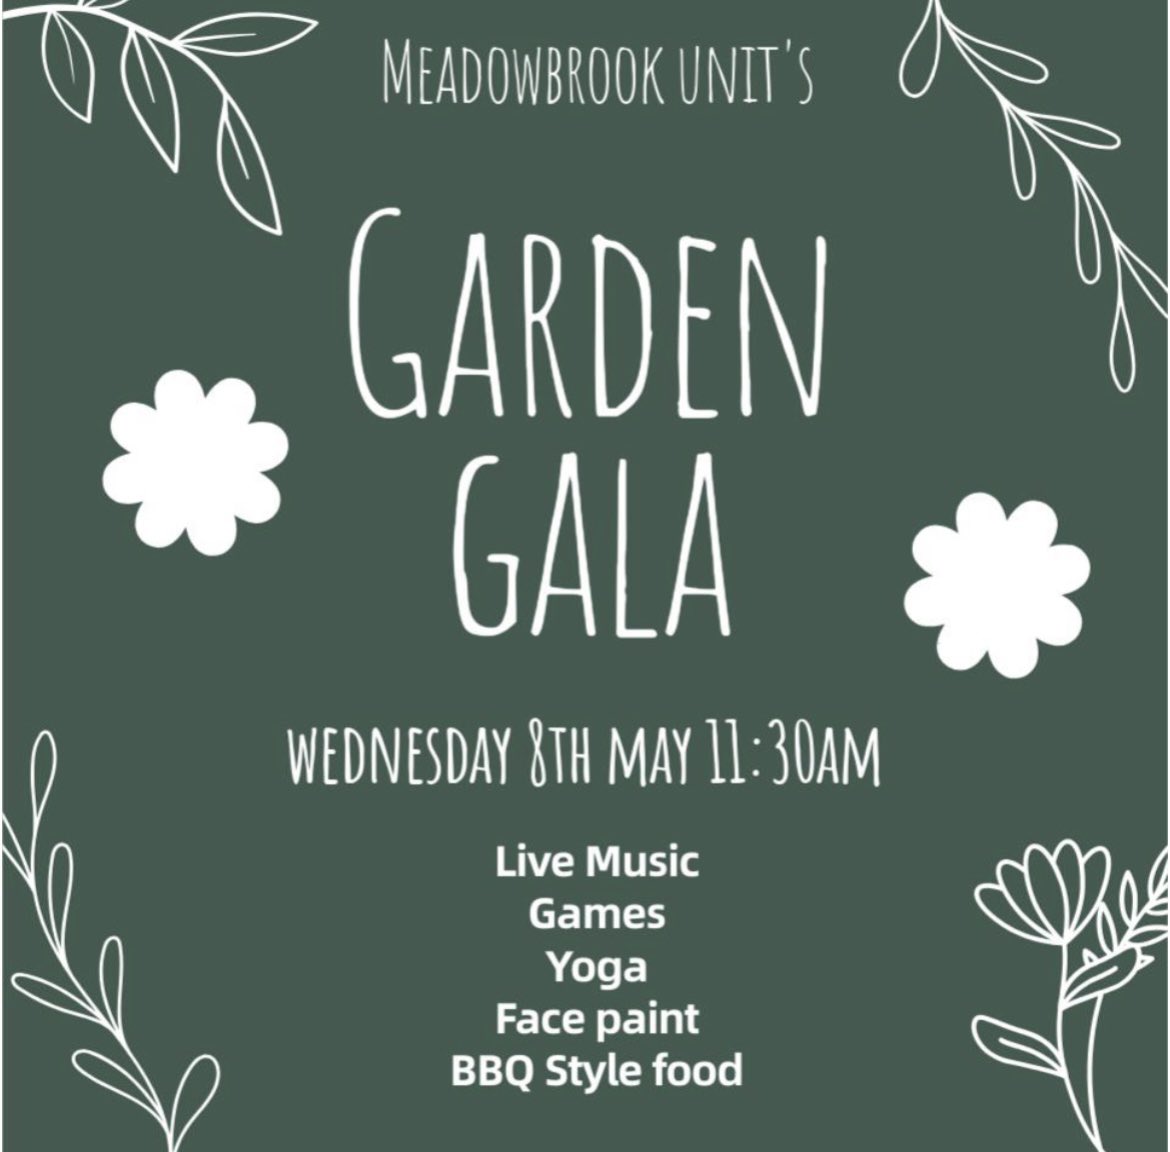 Garden Gala 🍃 🌿 BBQ Food 🌿 Yoga 🌿 Face Art 🌿 Music 🌿 Garden games and more… Thank you to @OatesKeely for organising! @GMMH_NHS #TakeALookAtMeadowbrook #GardenGala